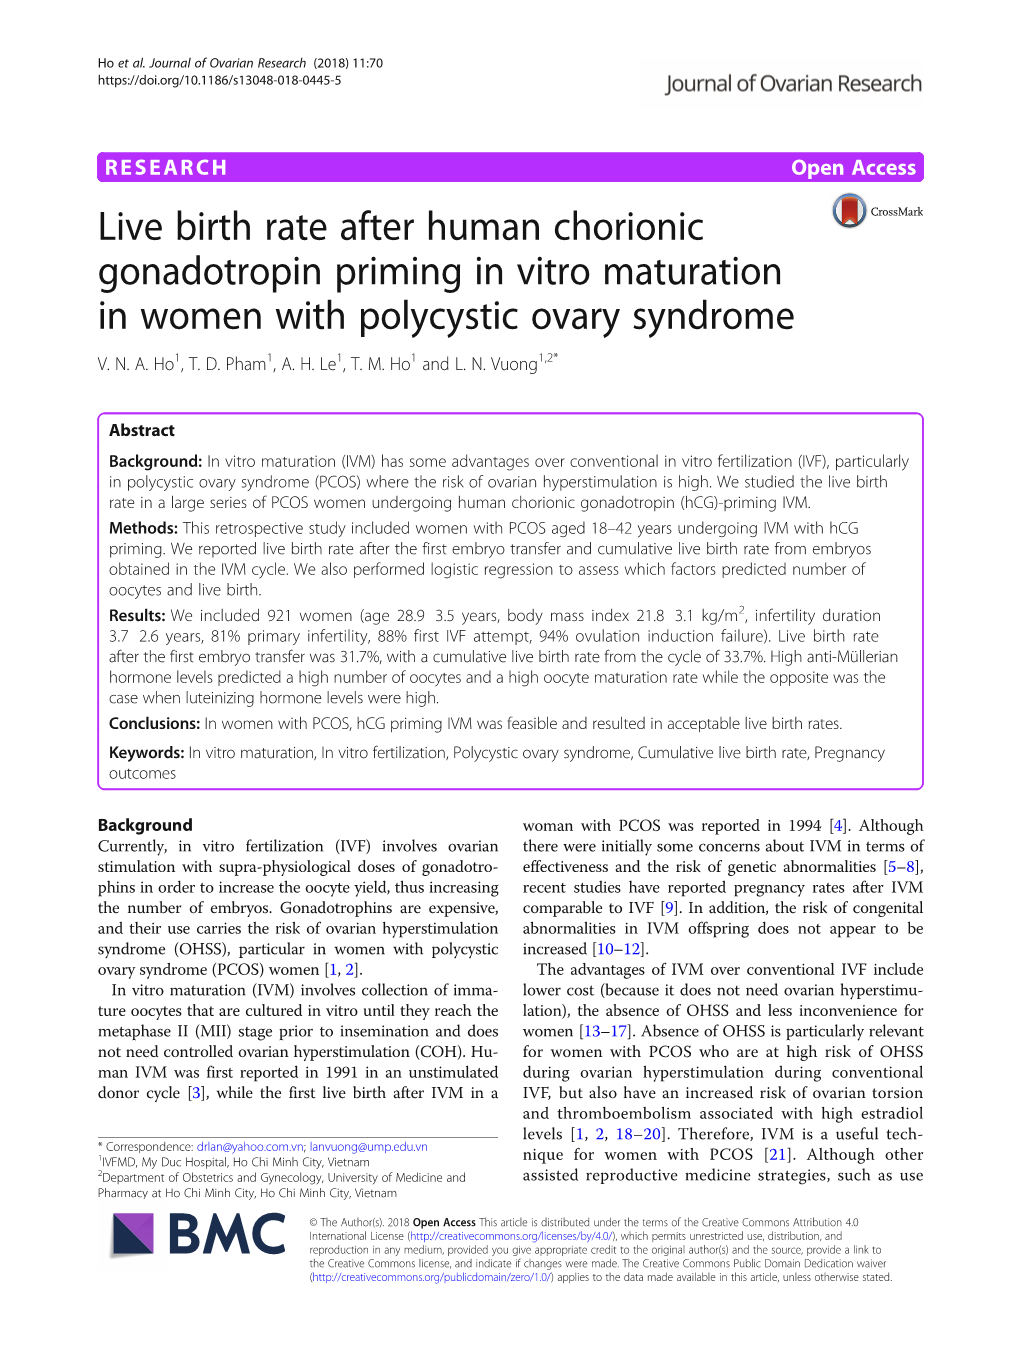 Live Birth Rate After Human Chorionic Gonadotropin Priming in Vitro Maturation in Women with Polycystic Ovary Syndrome V